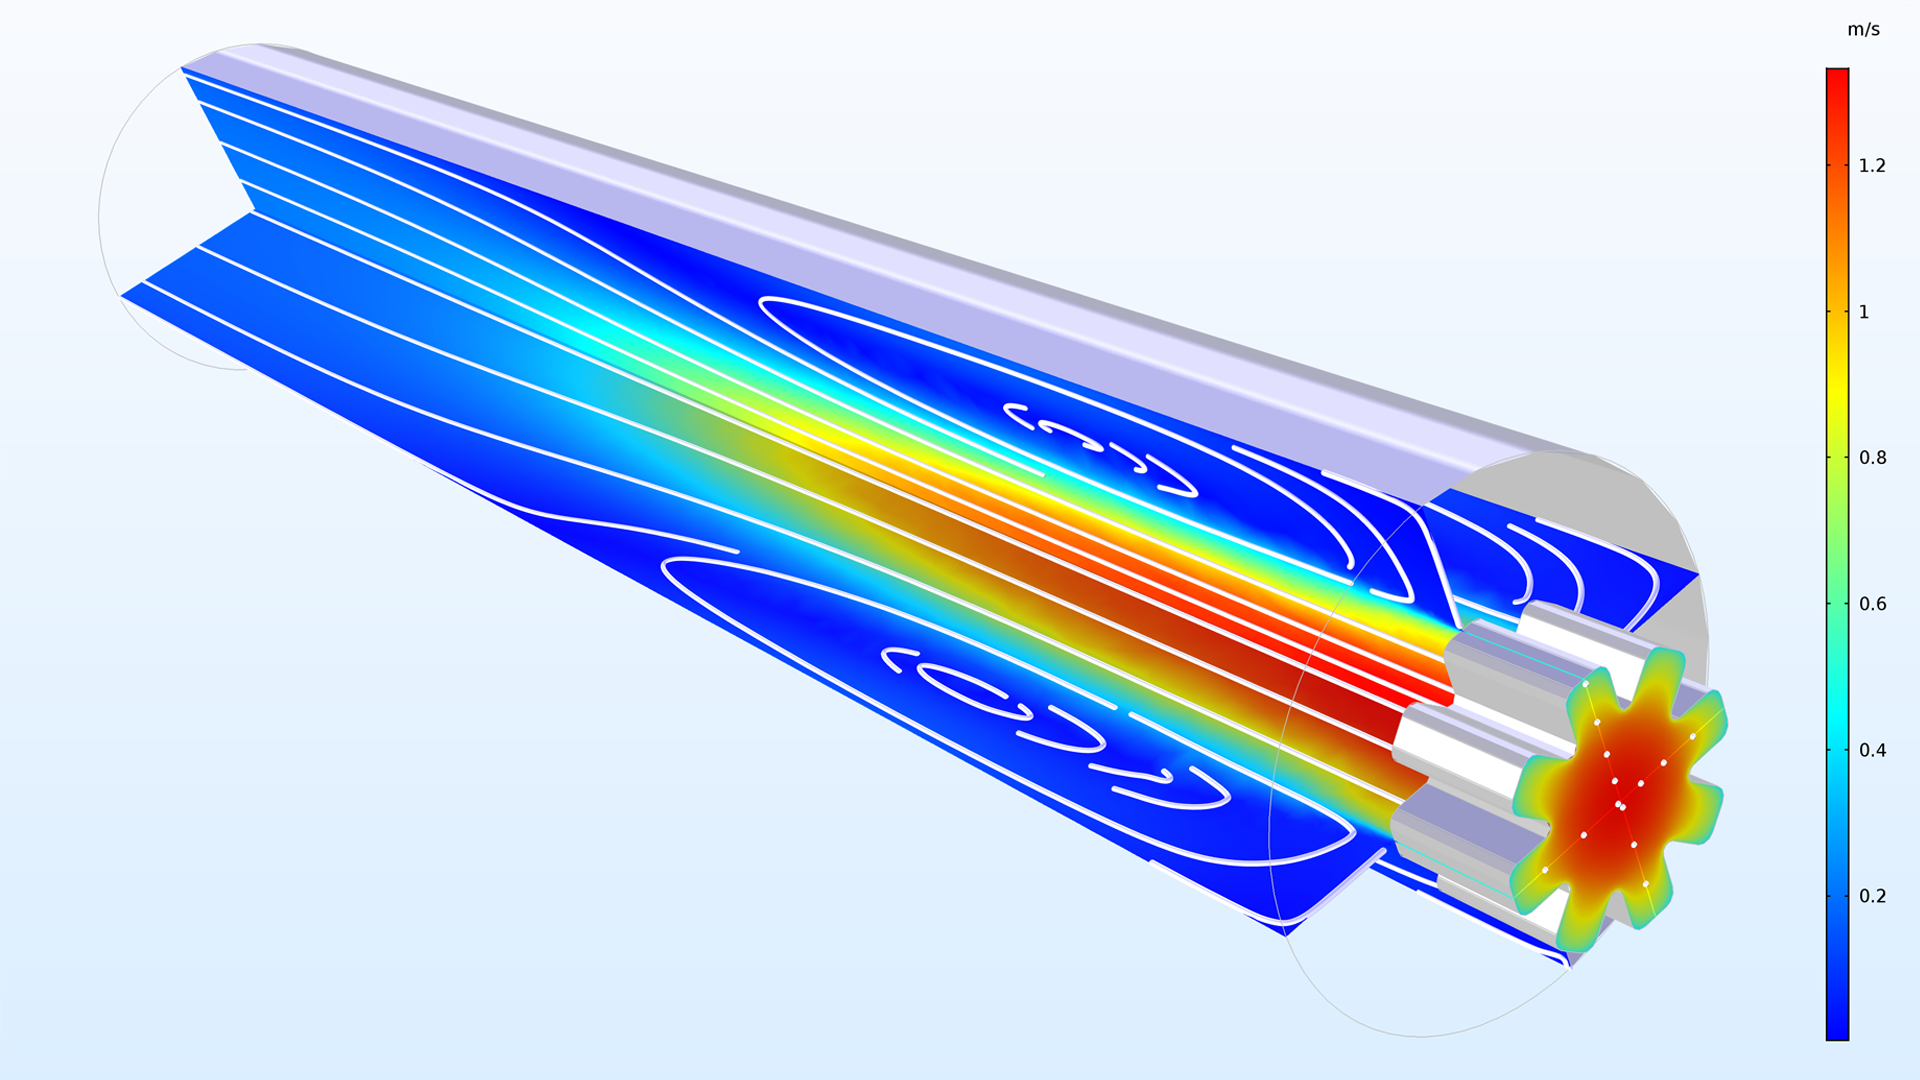 Specify upstream conditions on Inlet (CFD) and Inflow (Heat Transfer) boundaries to model more accurate turbulence properties.